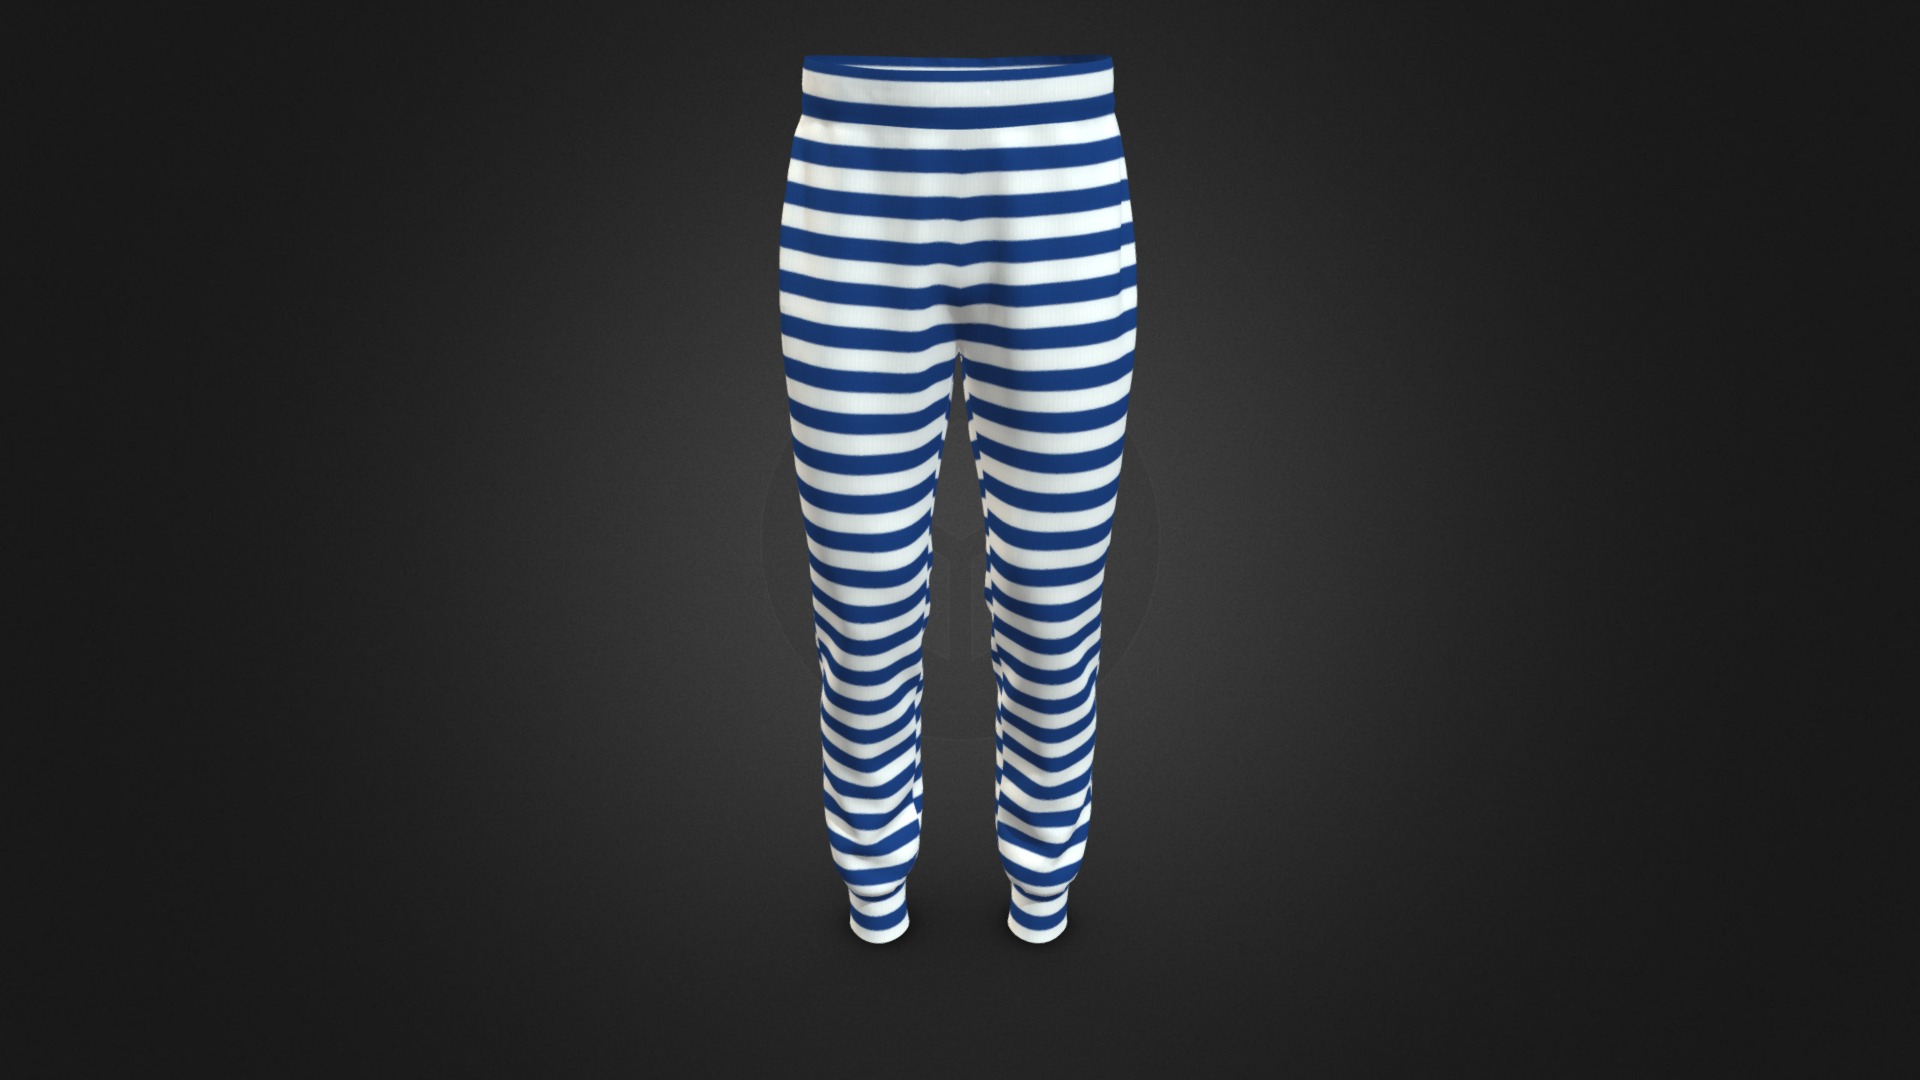 3D model Jogger pants - This is a 3D model of the Jogger pants. The 3D model is about a close-up of some blue and white striped objects.